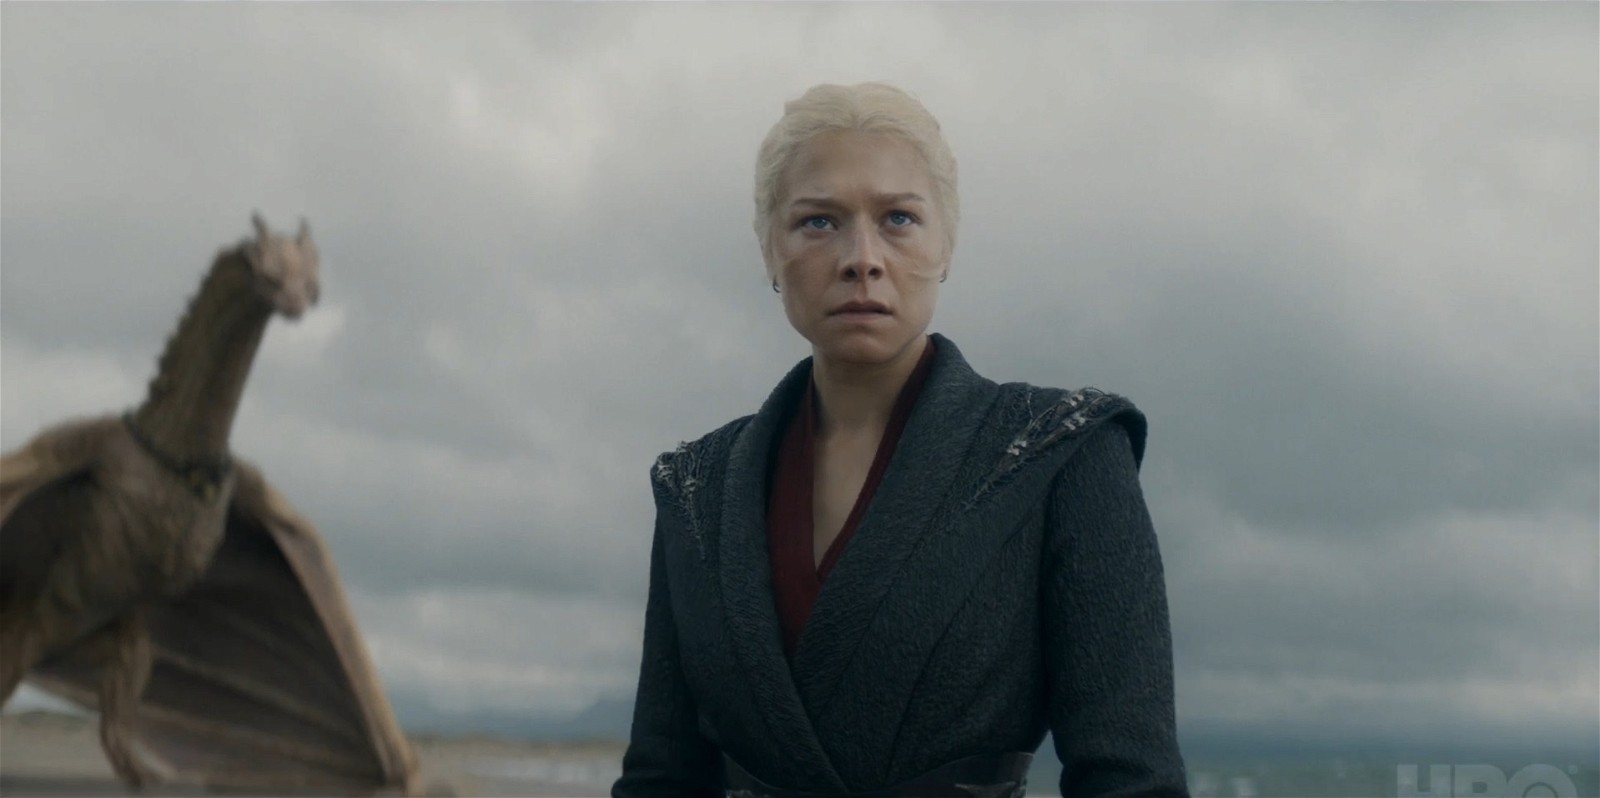 A pensive Emma D'Arcy as Queen Rhaenyra in a still from House of Dragon Season 2 trailer